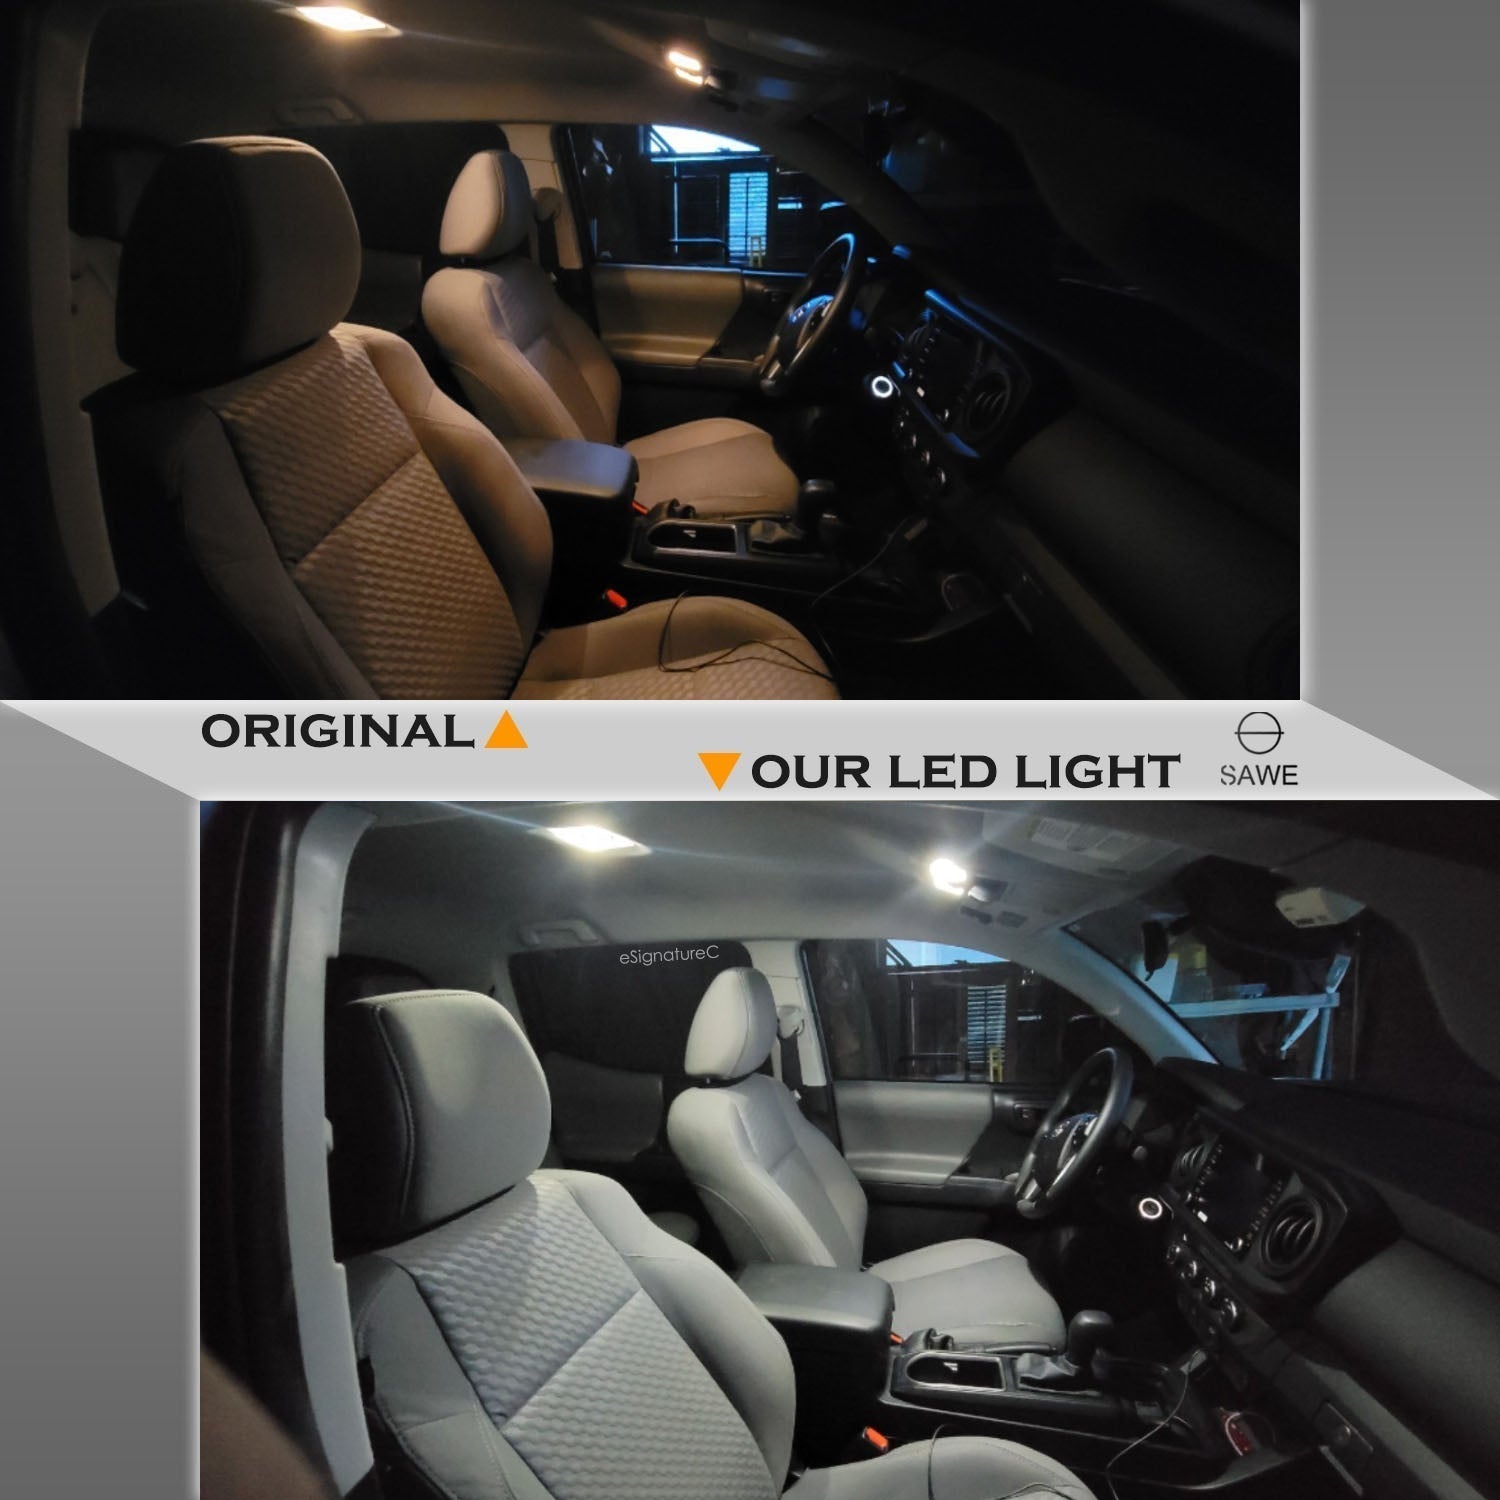 For Audi A6 S6 Interior LED Lights - Dome & Map Light Bulb Package Kit for 2012 - 2015 - White